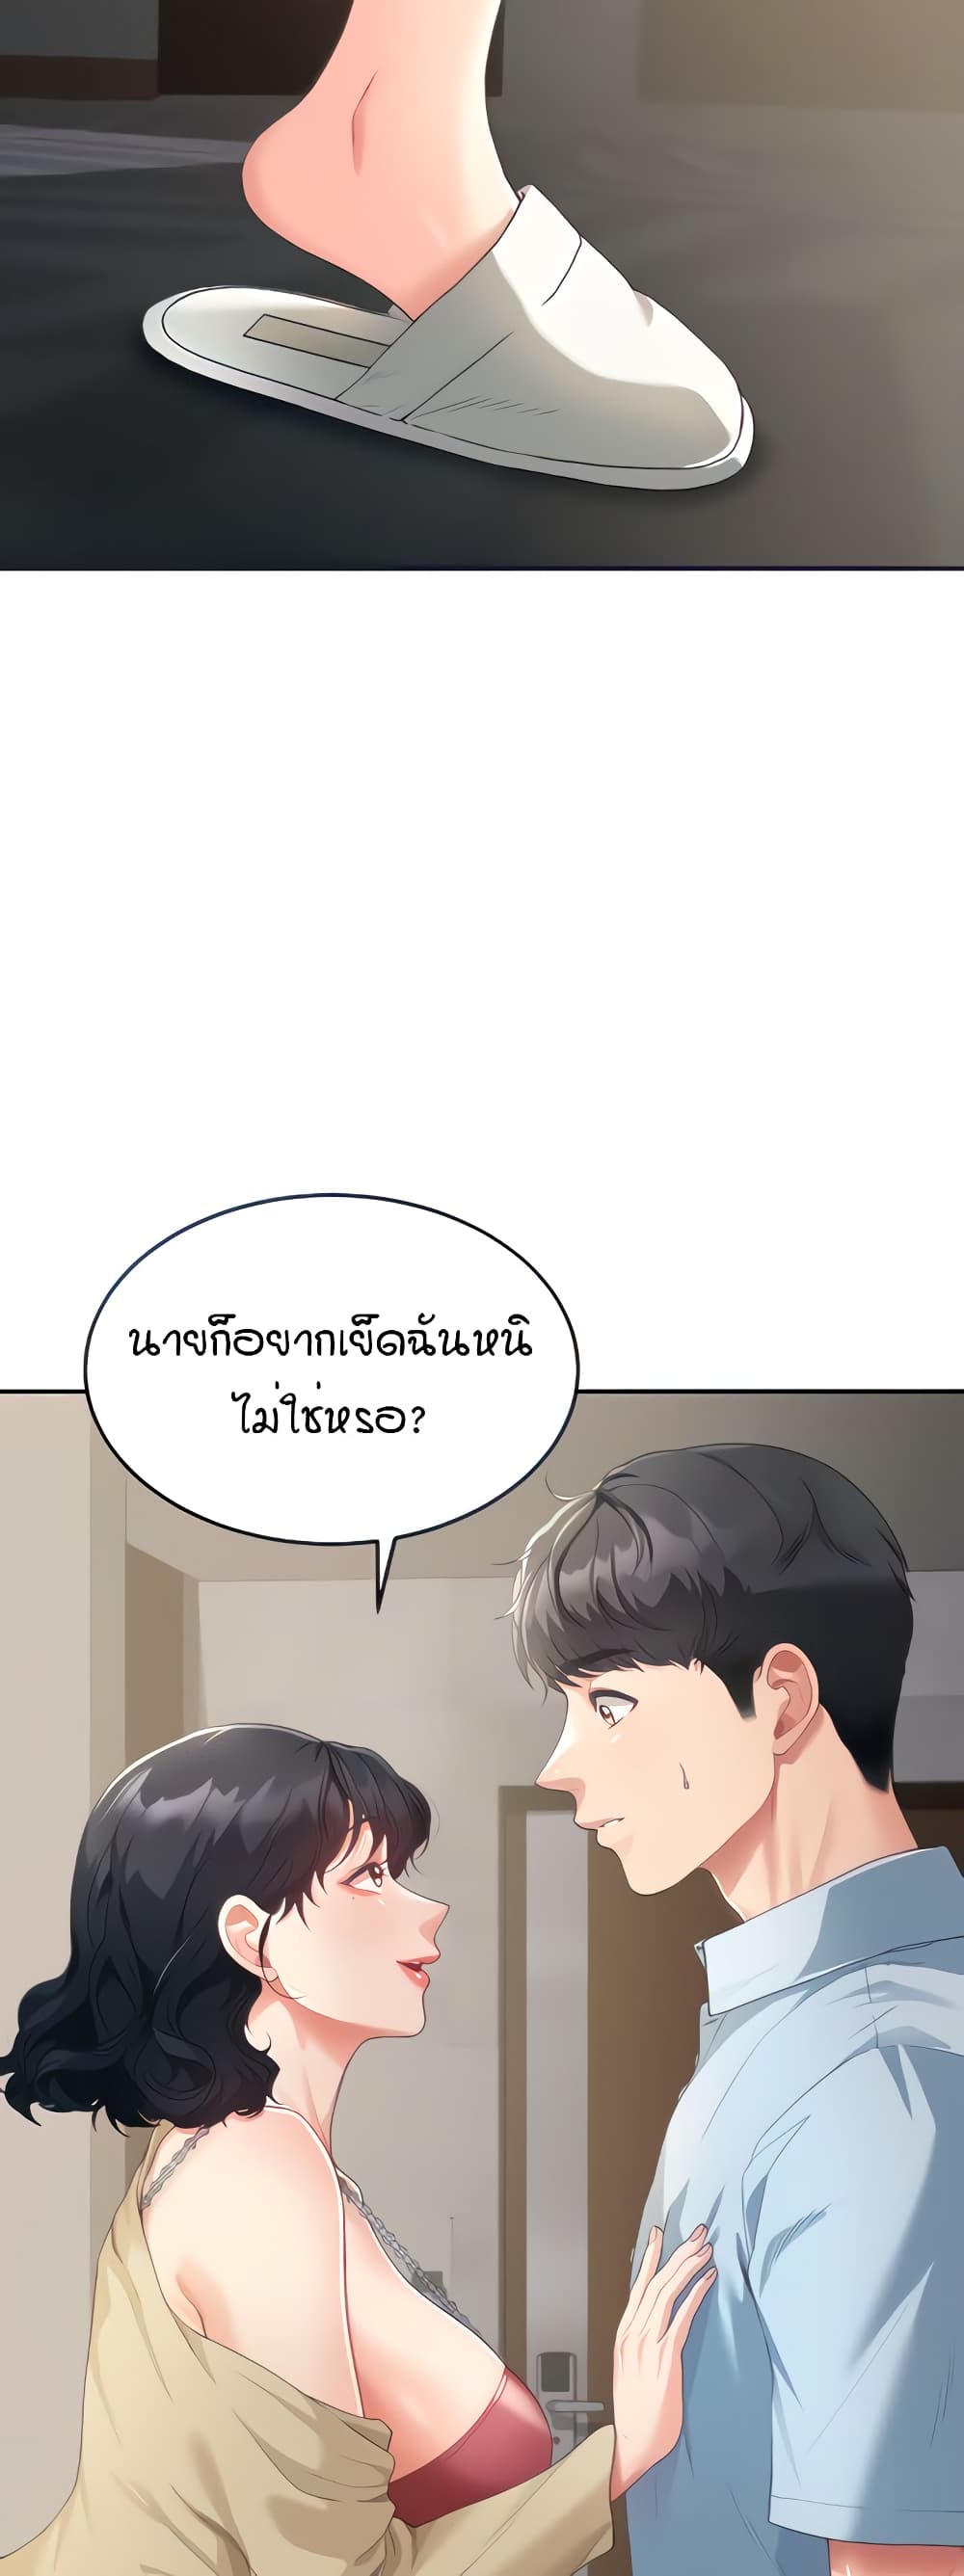 Is It Your Mother or Sister? ตอนที่ 3 ภาพ 12